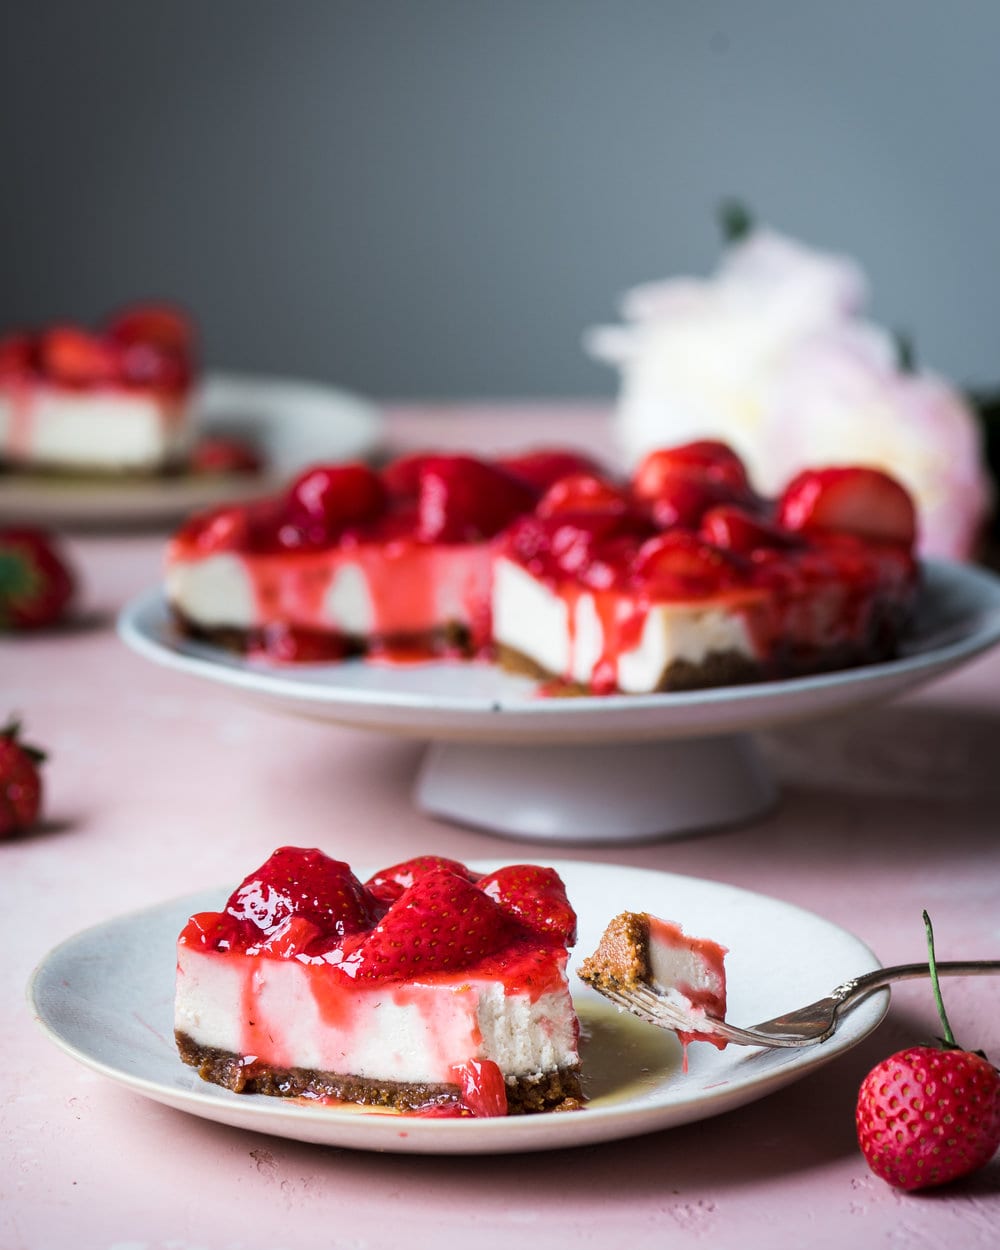 Vegan cheesecake slice covered in strawberry sauce on pink table.